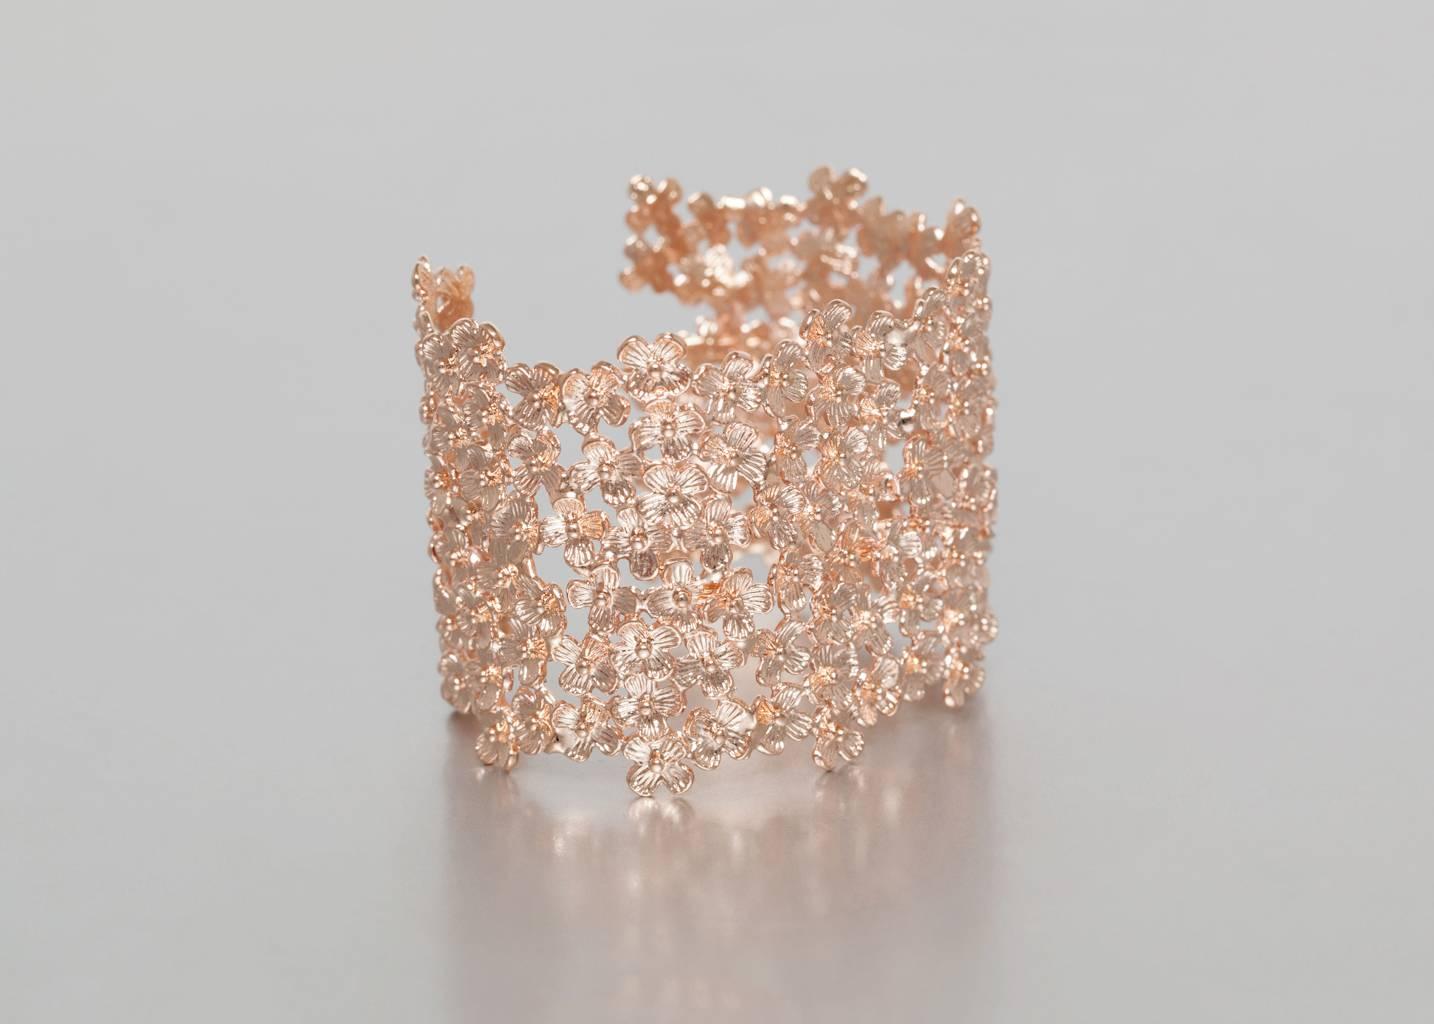 Cuff bracelet from Ambre & Louise gilded with 18 carat rose gold. 
Adjustable size, 1.5” wide , 7” around expandable.